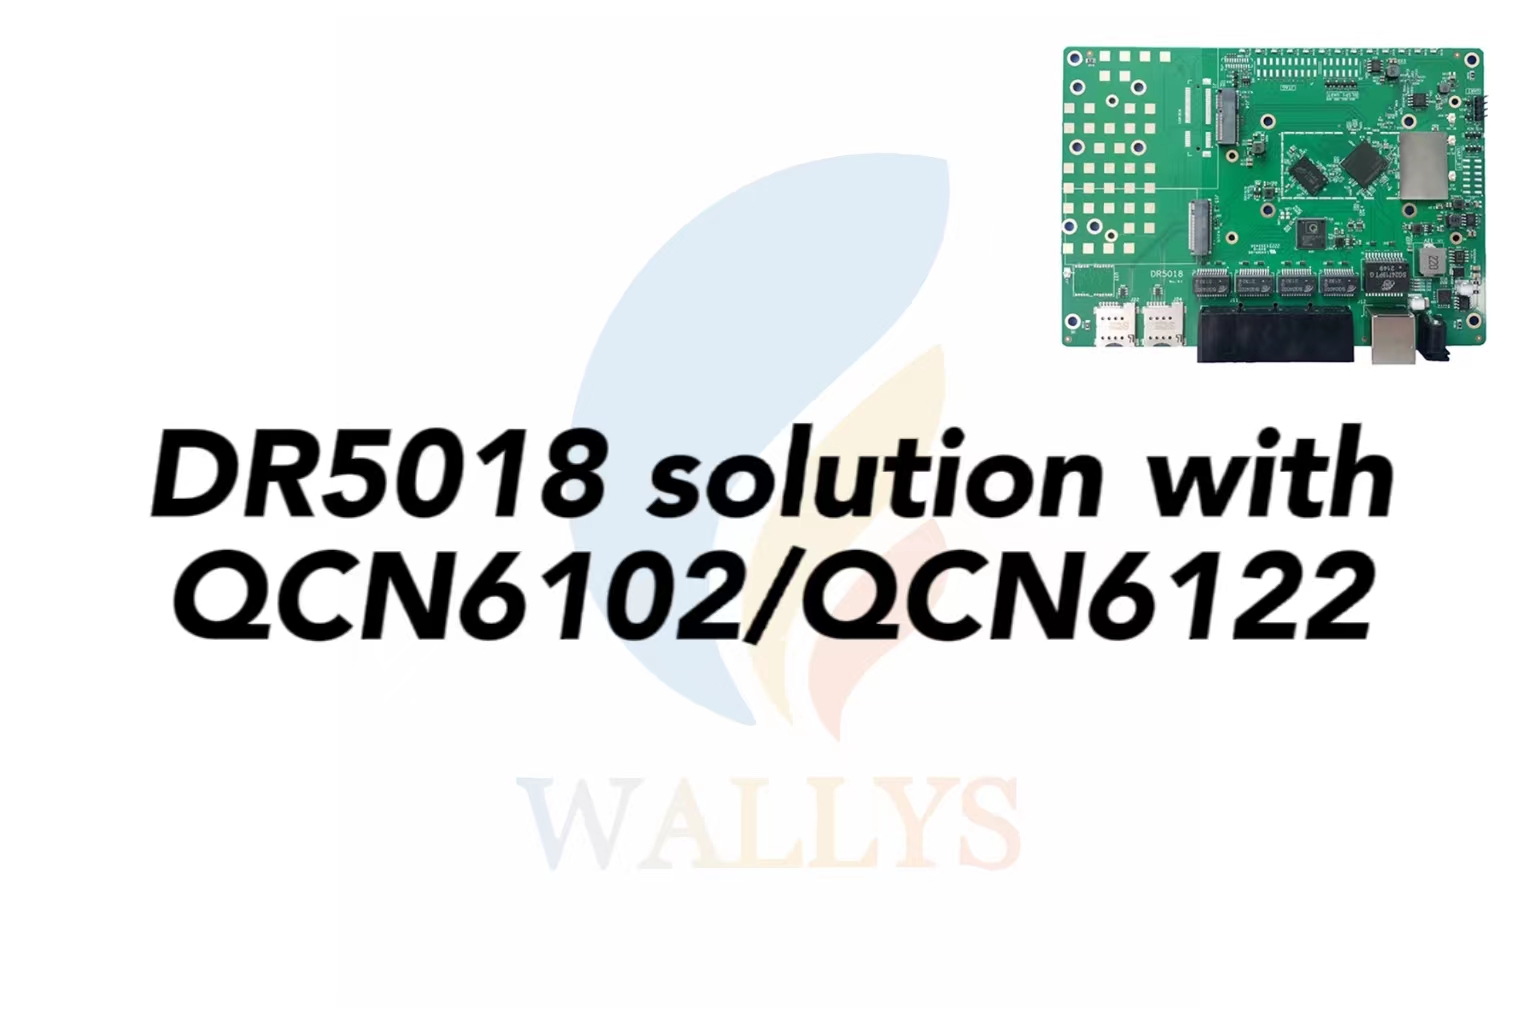 802.11s and Easymesh|IPQ5018 CPU Solution|Wallystech DR5018